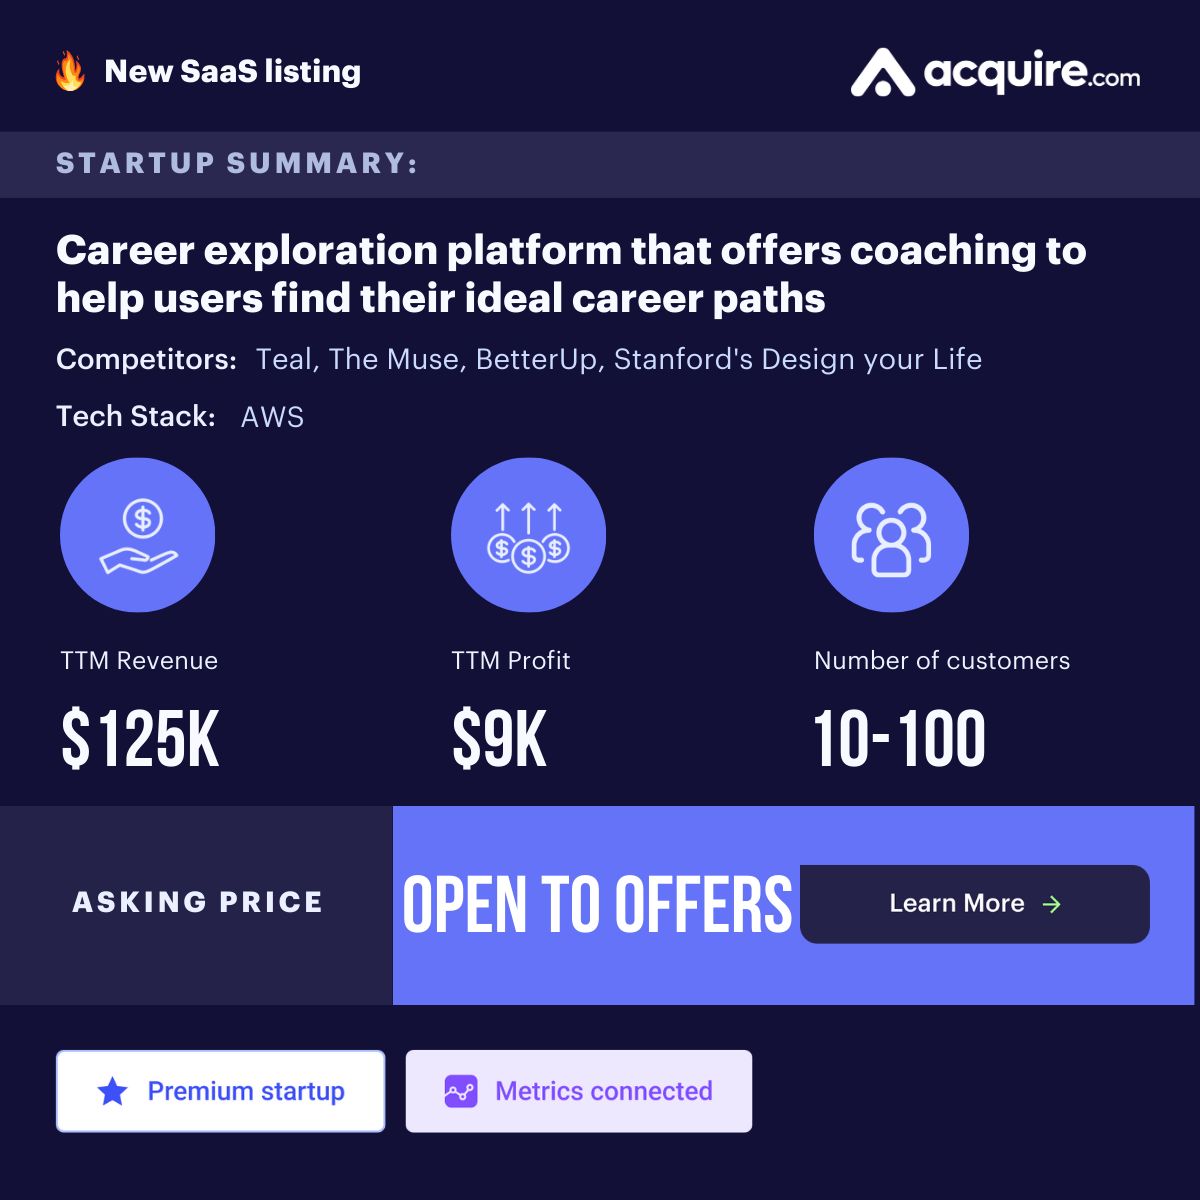 🔥 New GBA Startup Listed 🔥 SaaS | Career exploration platform that offers coaching to help users find their ideal career paths | $125k TTM revenue Asking Price: Open to Offers Contact the seller here: buff.ly/3uF65dO